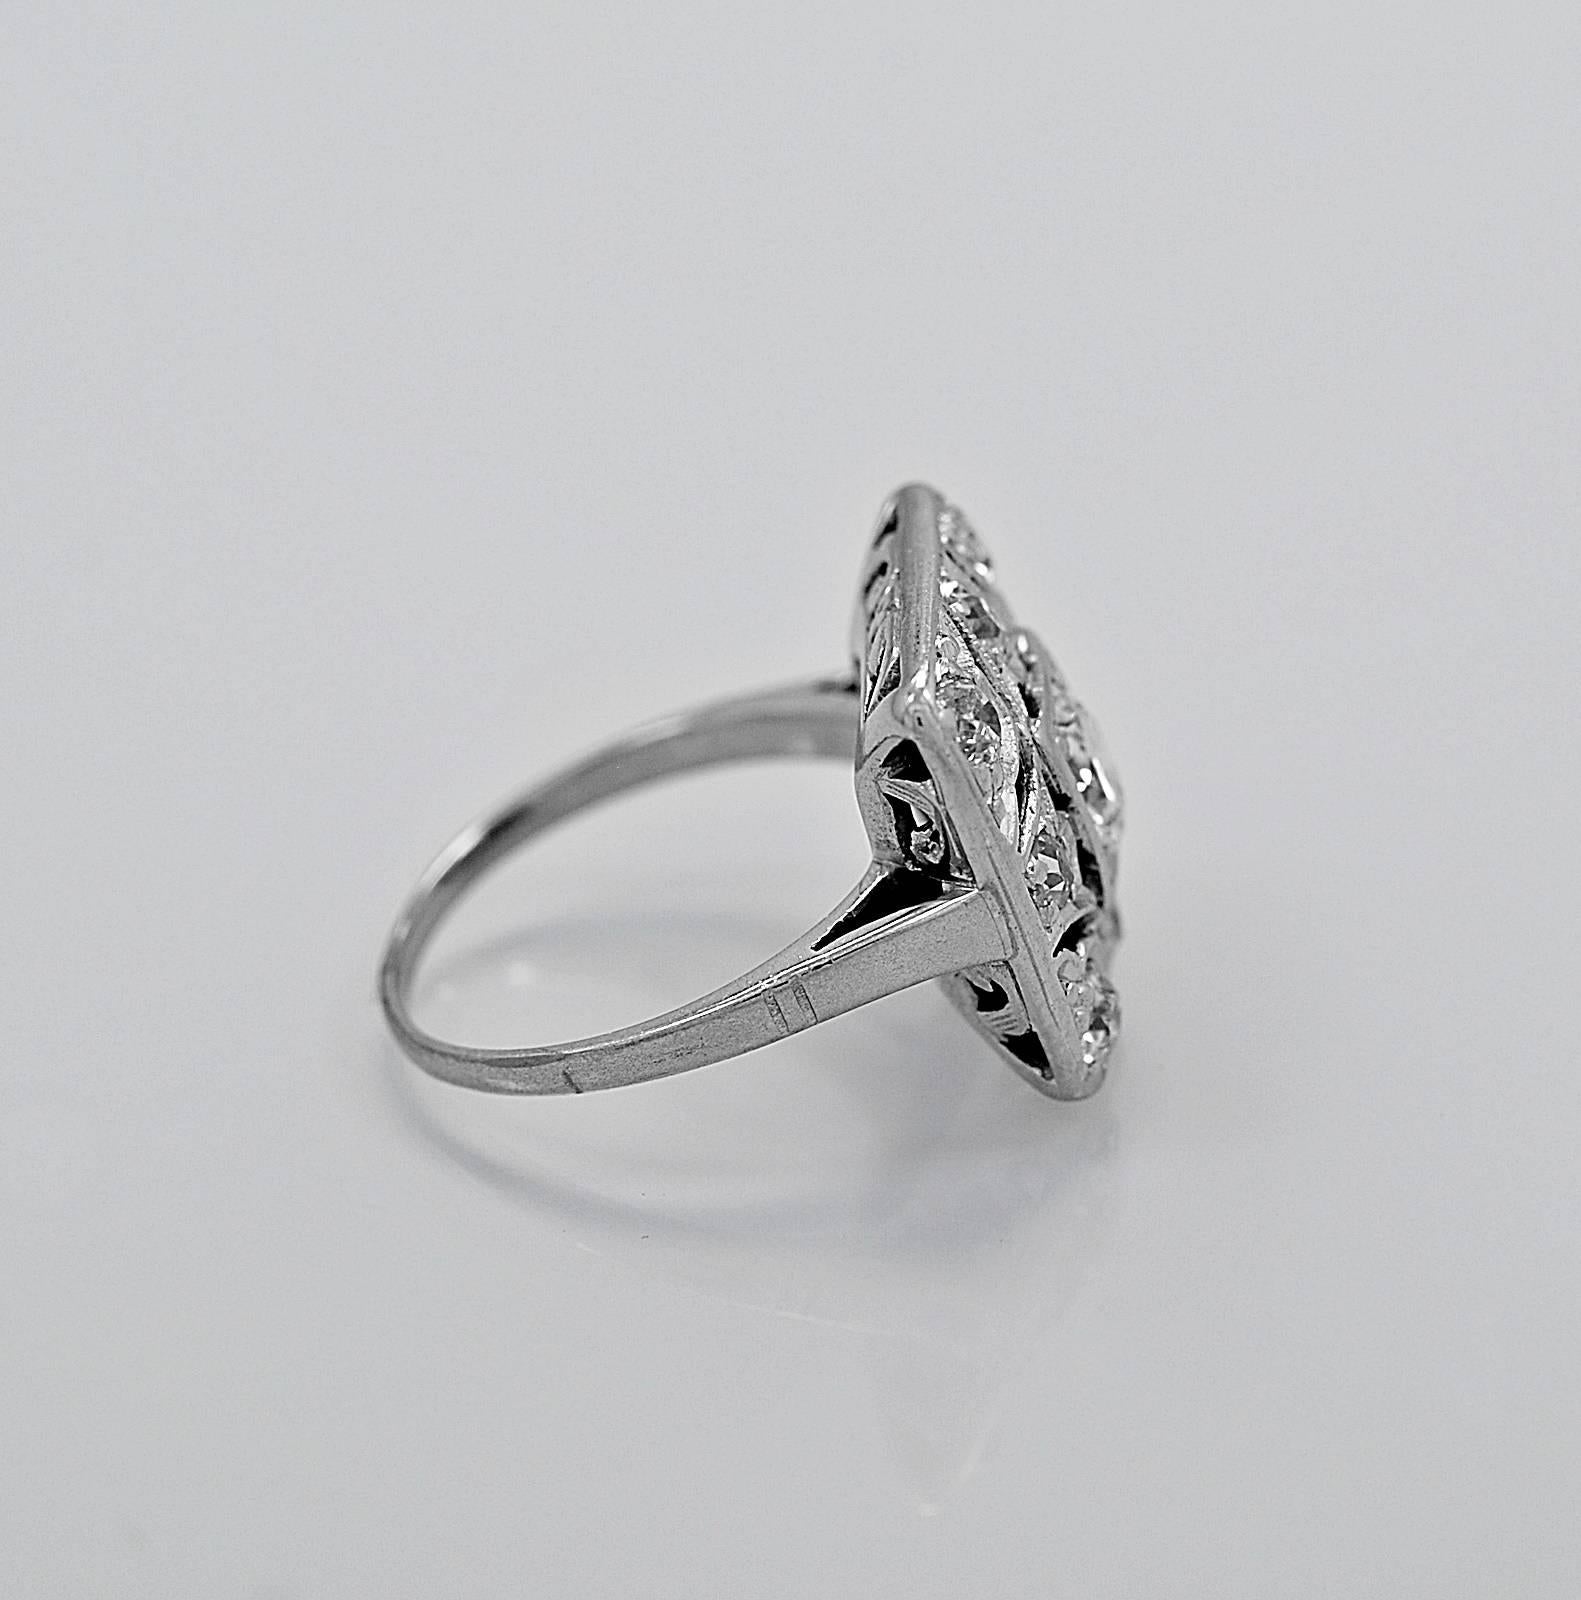 An antique engagement ring or fashion ring crafted in platinum featuring a .50ct. apx. European cut center diamond that is accented with .60ct. apx. T.W. of European and single cut diamonds. The gallery is finely filigreed. This ring would be a